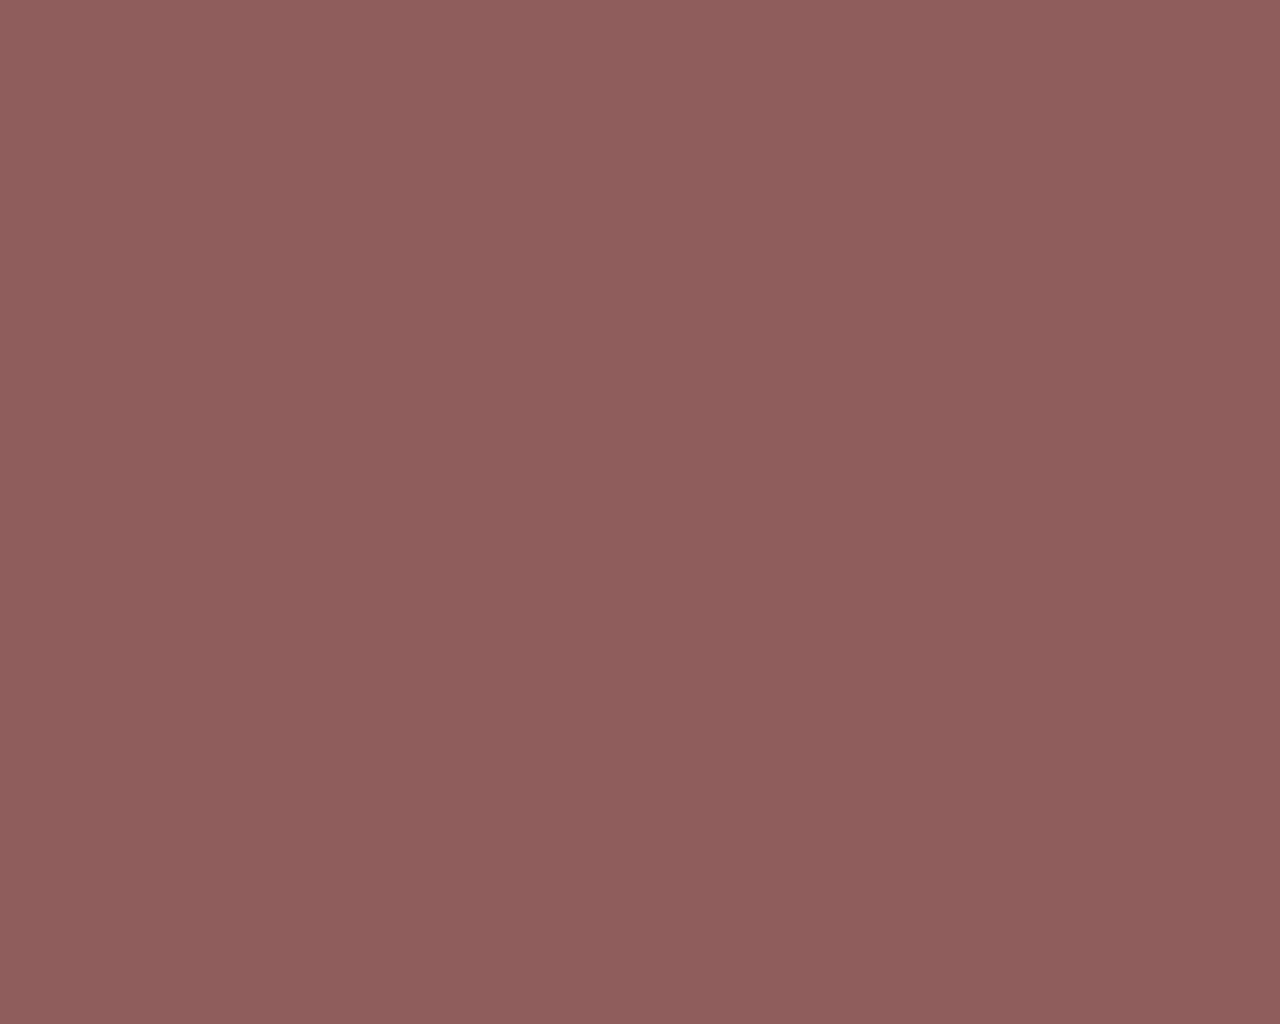 1280x1024 Rose Taupe Solid Color Background